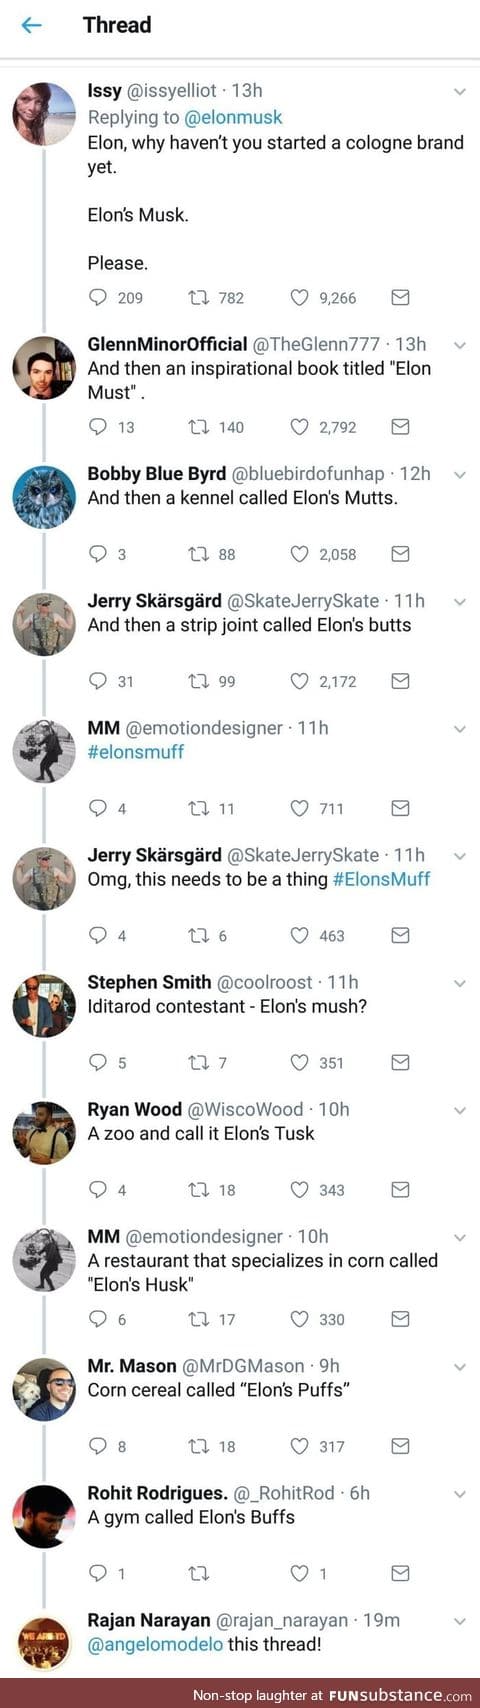 One of the best threads on twitter